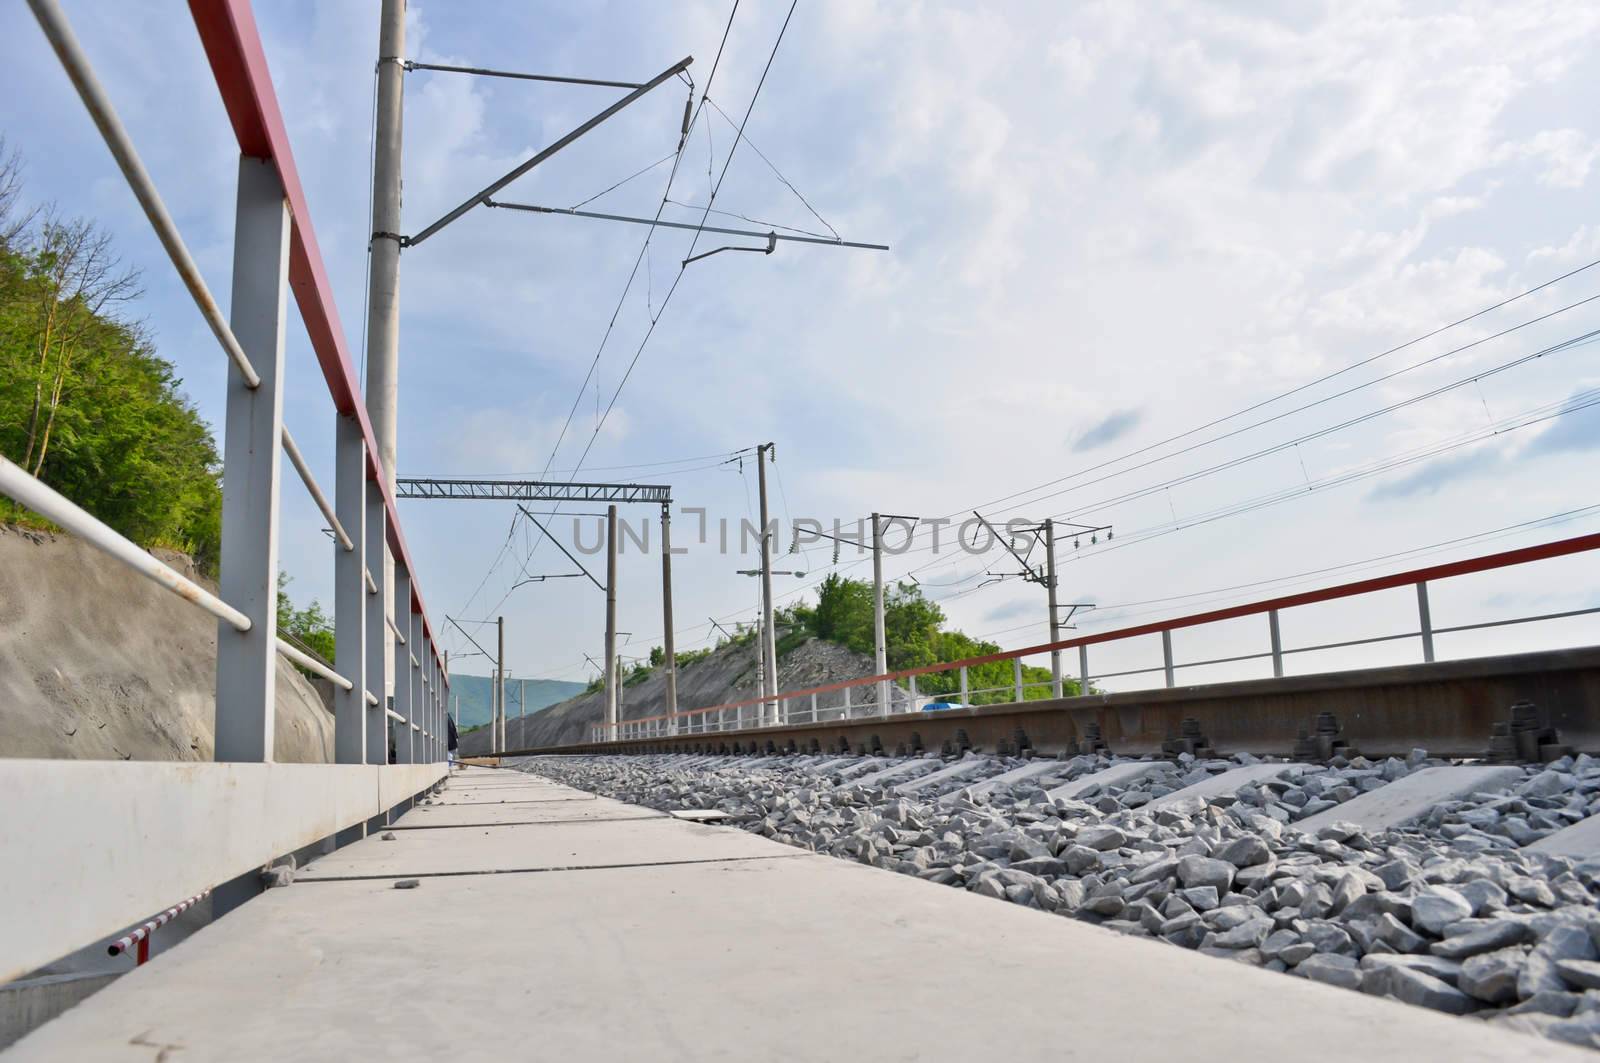 railroad track, embankment, and power poles